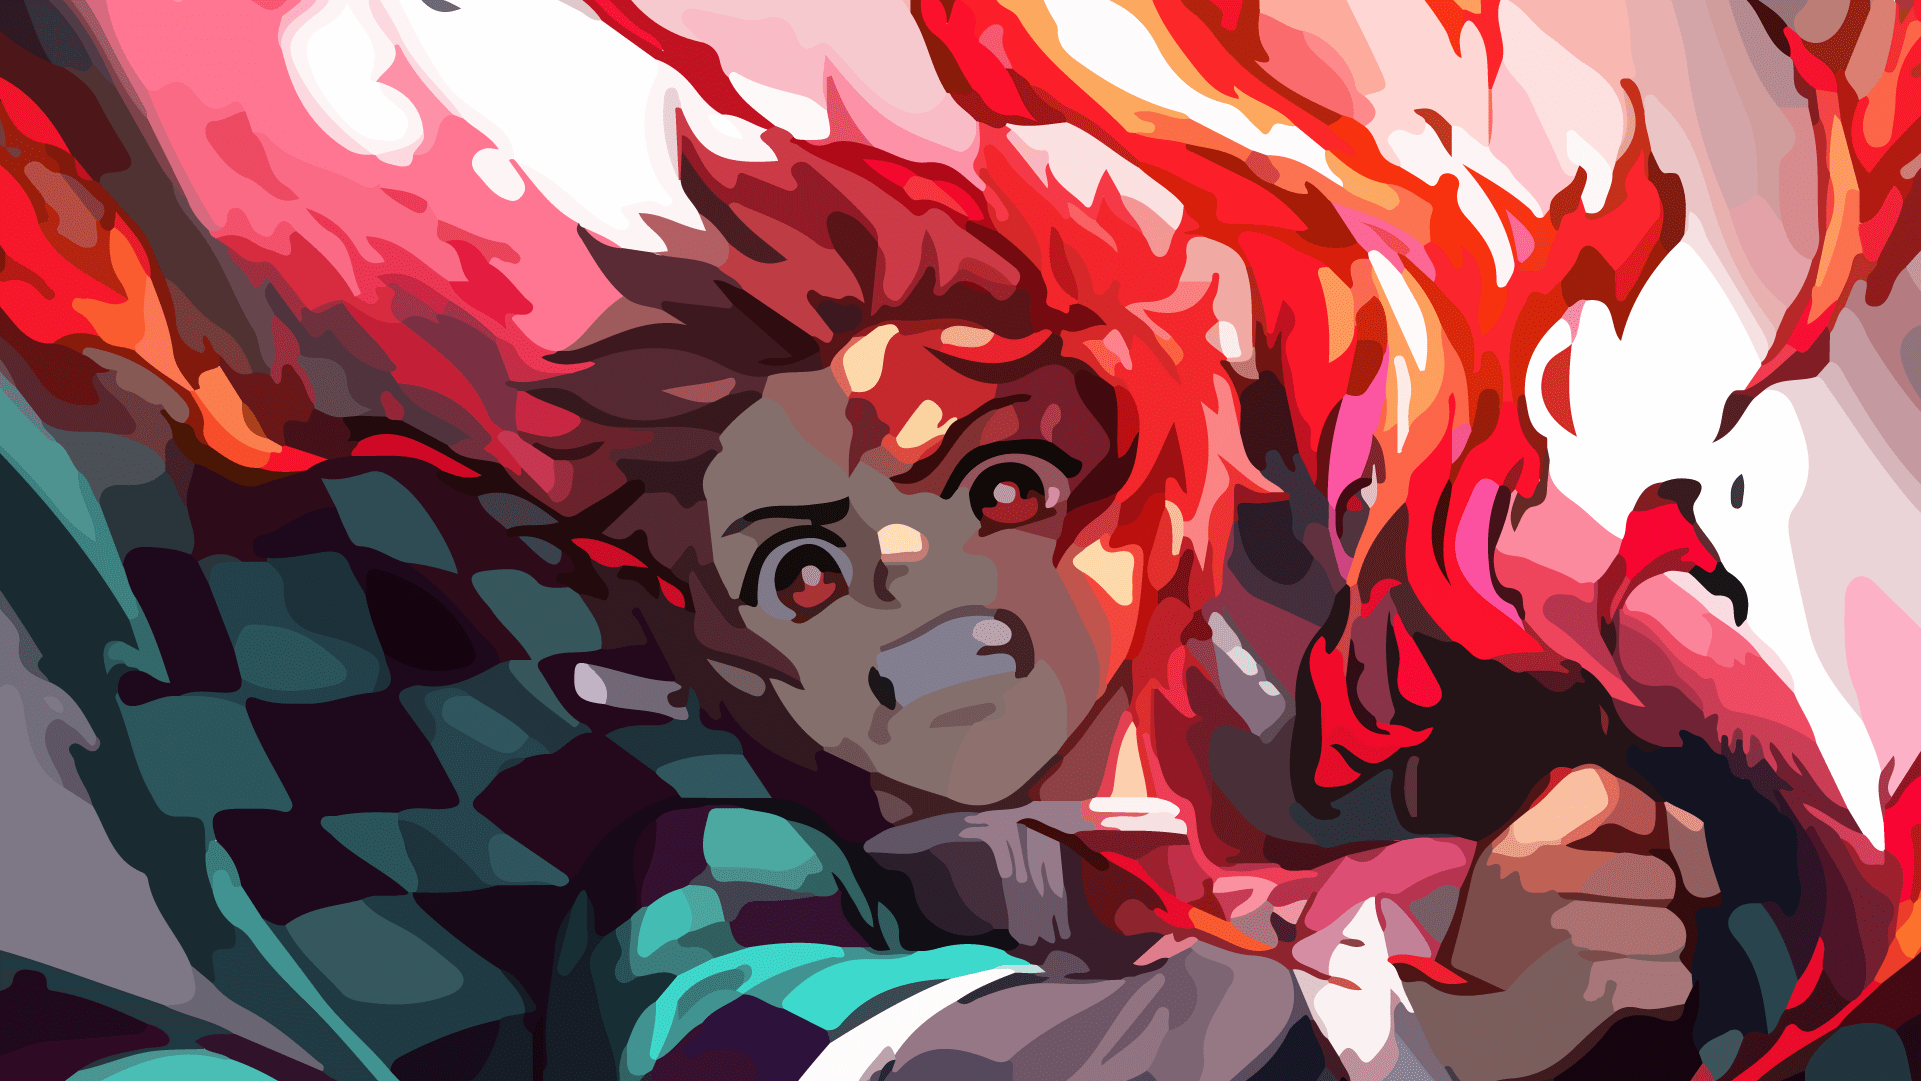 Anime boy with flames coming out of his head - Demon Slayer